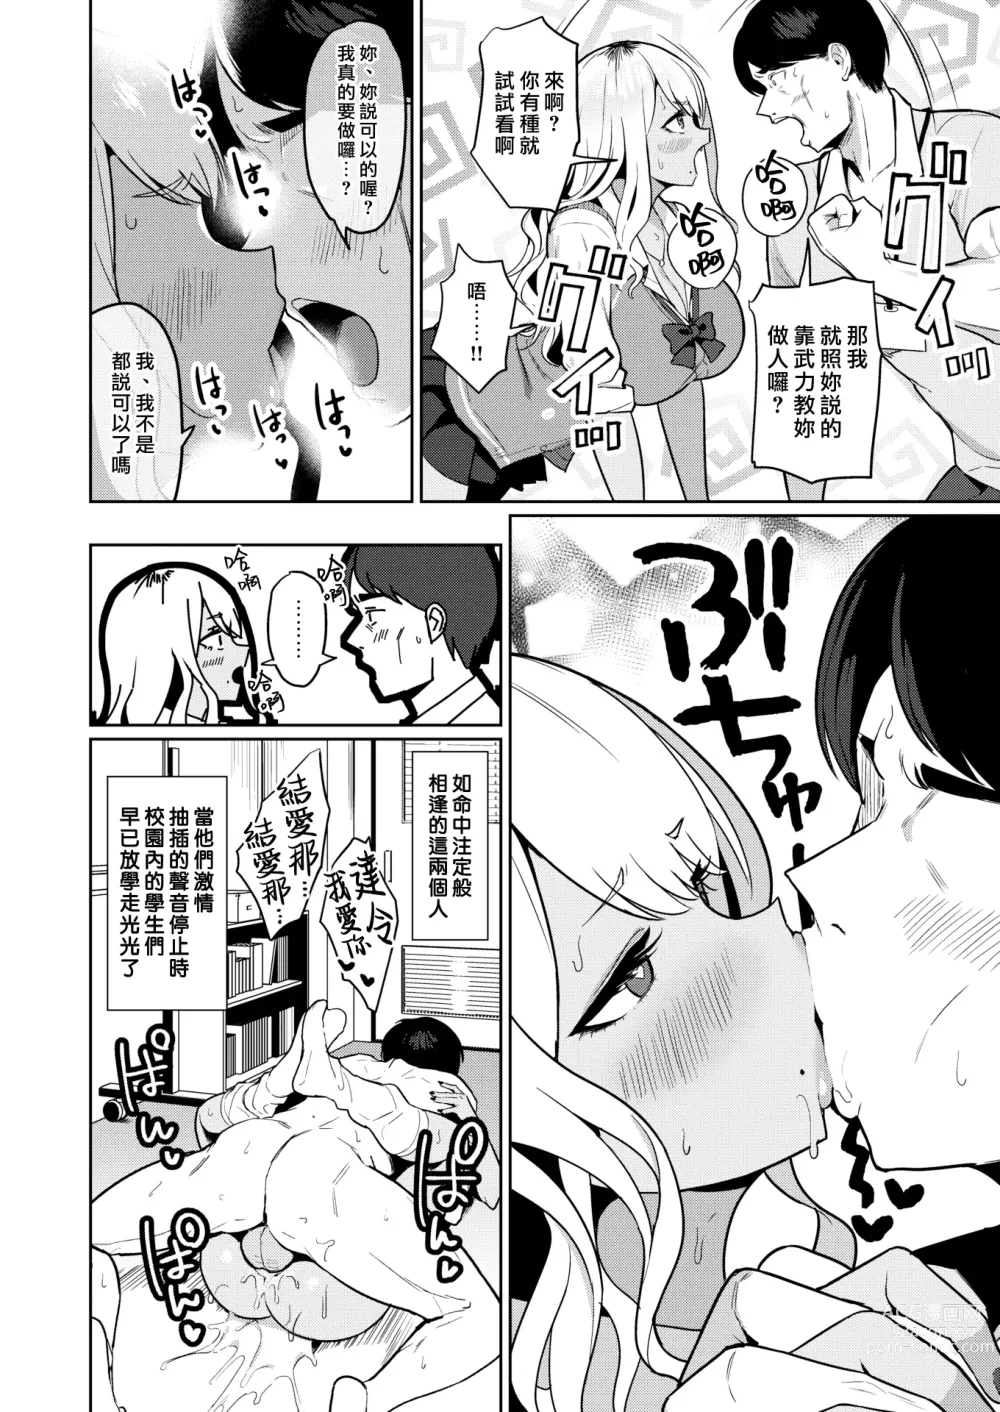 Page 8 of doujinshi センセイなんて大っ嫌い!!